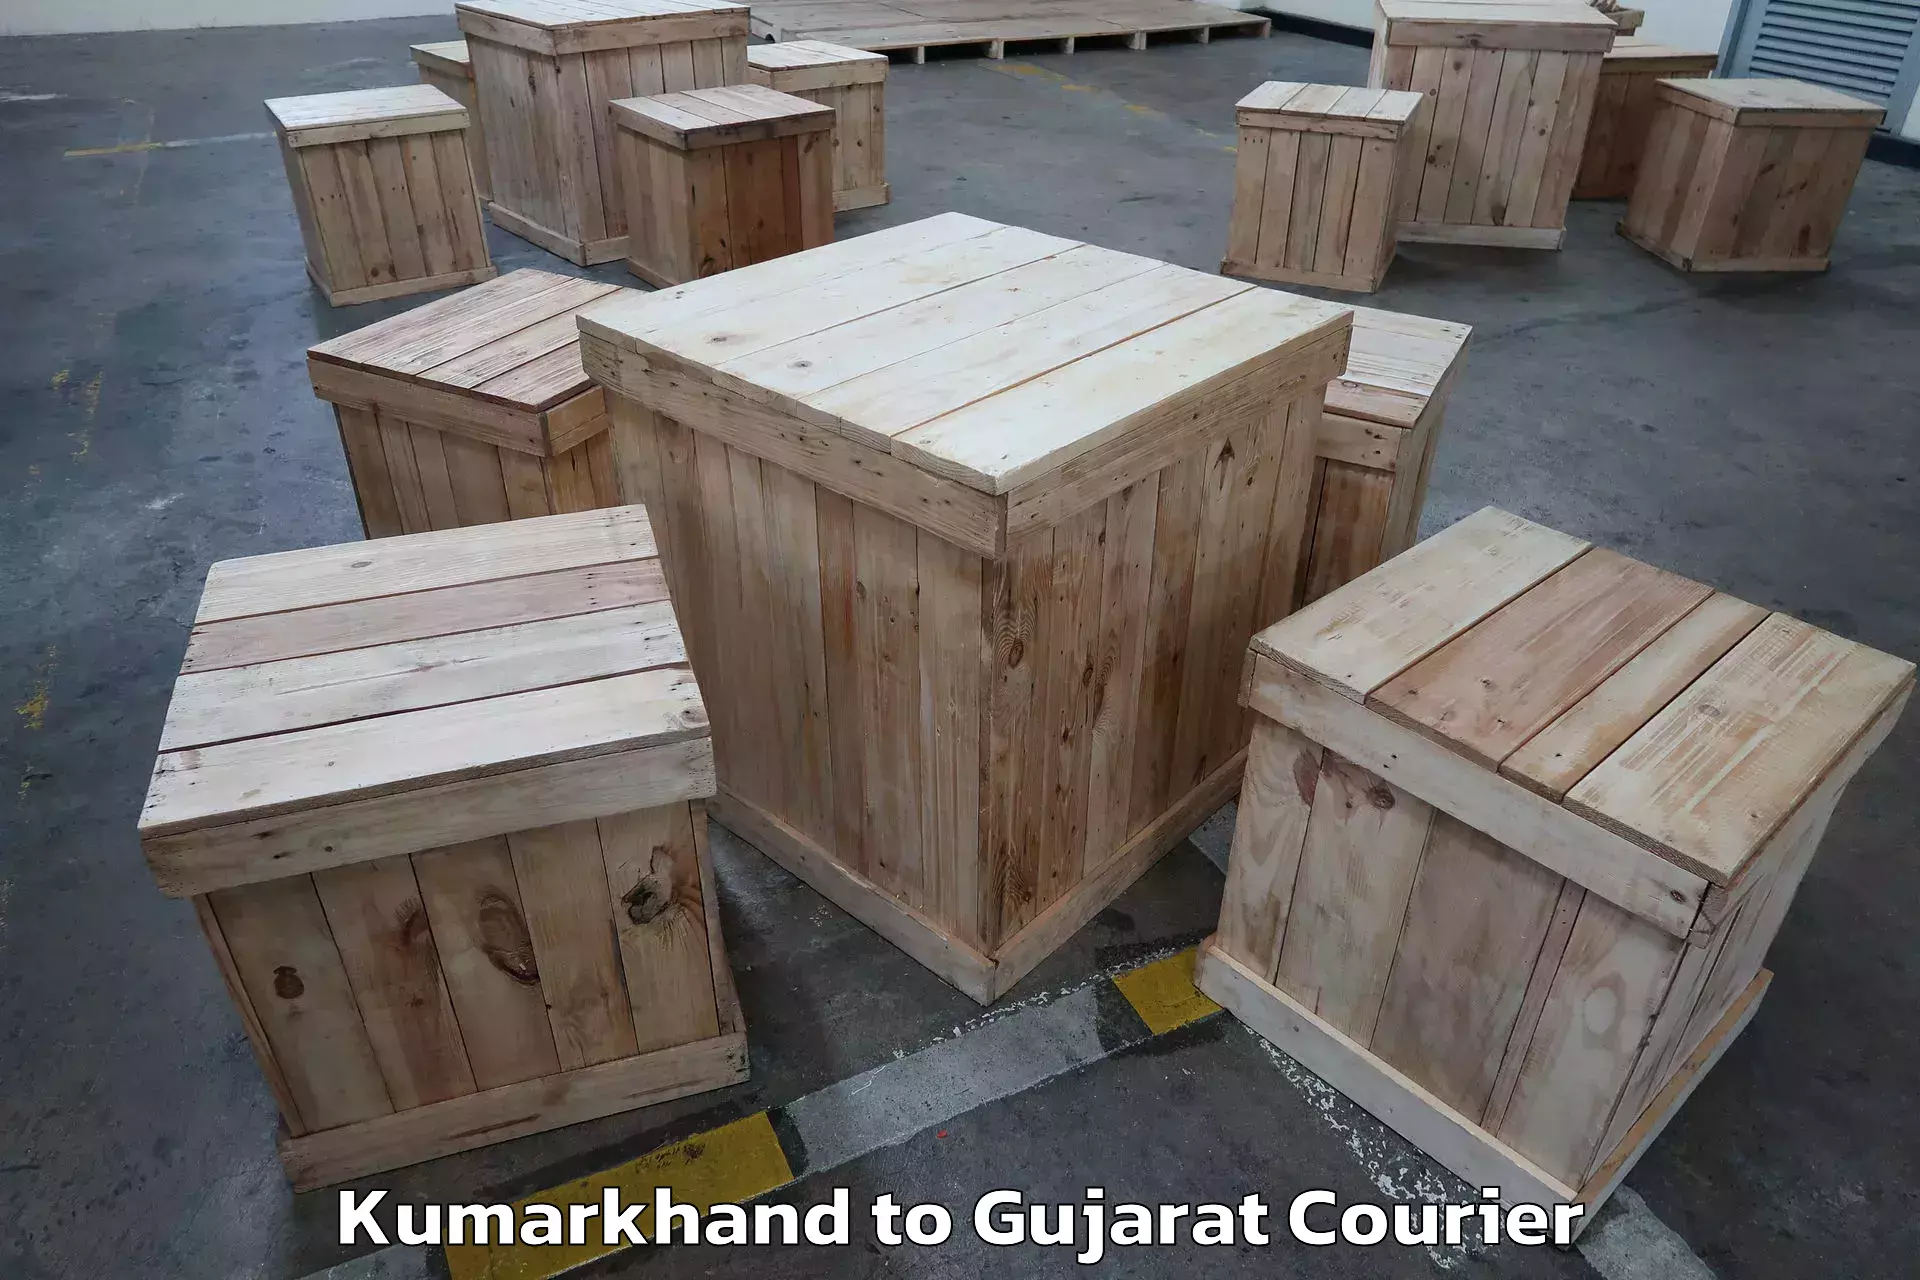 Smooth relocation services Kumarkhand to Surat